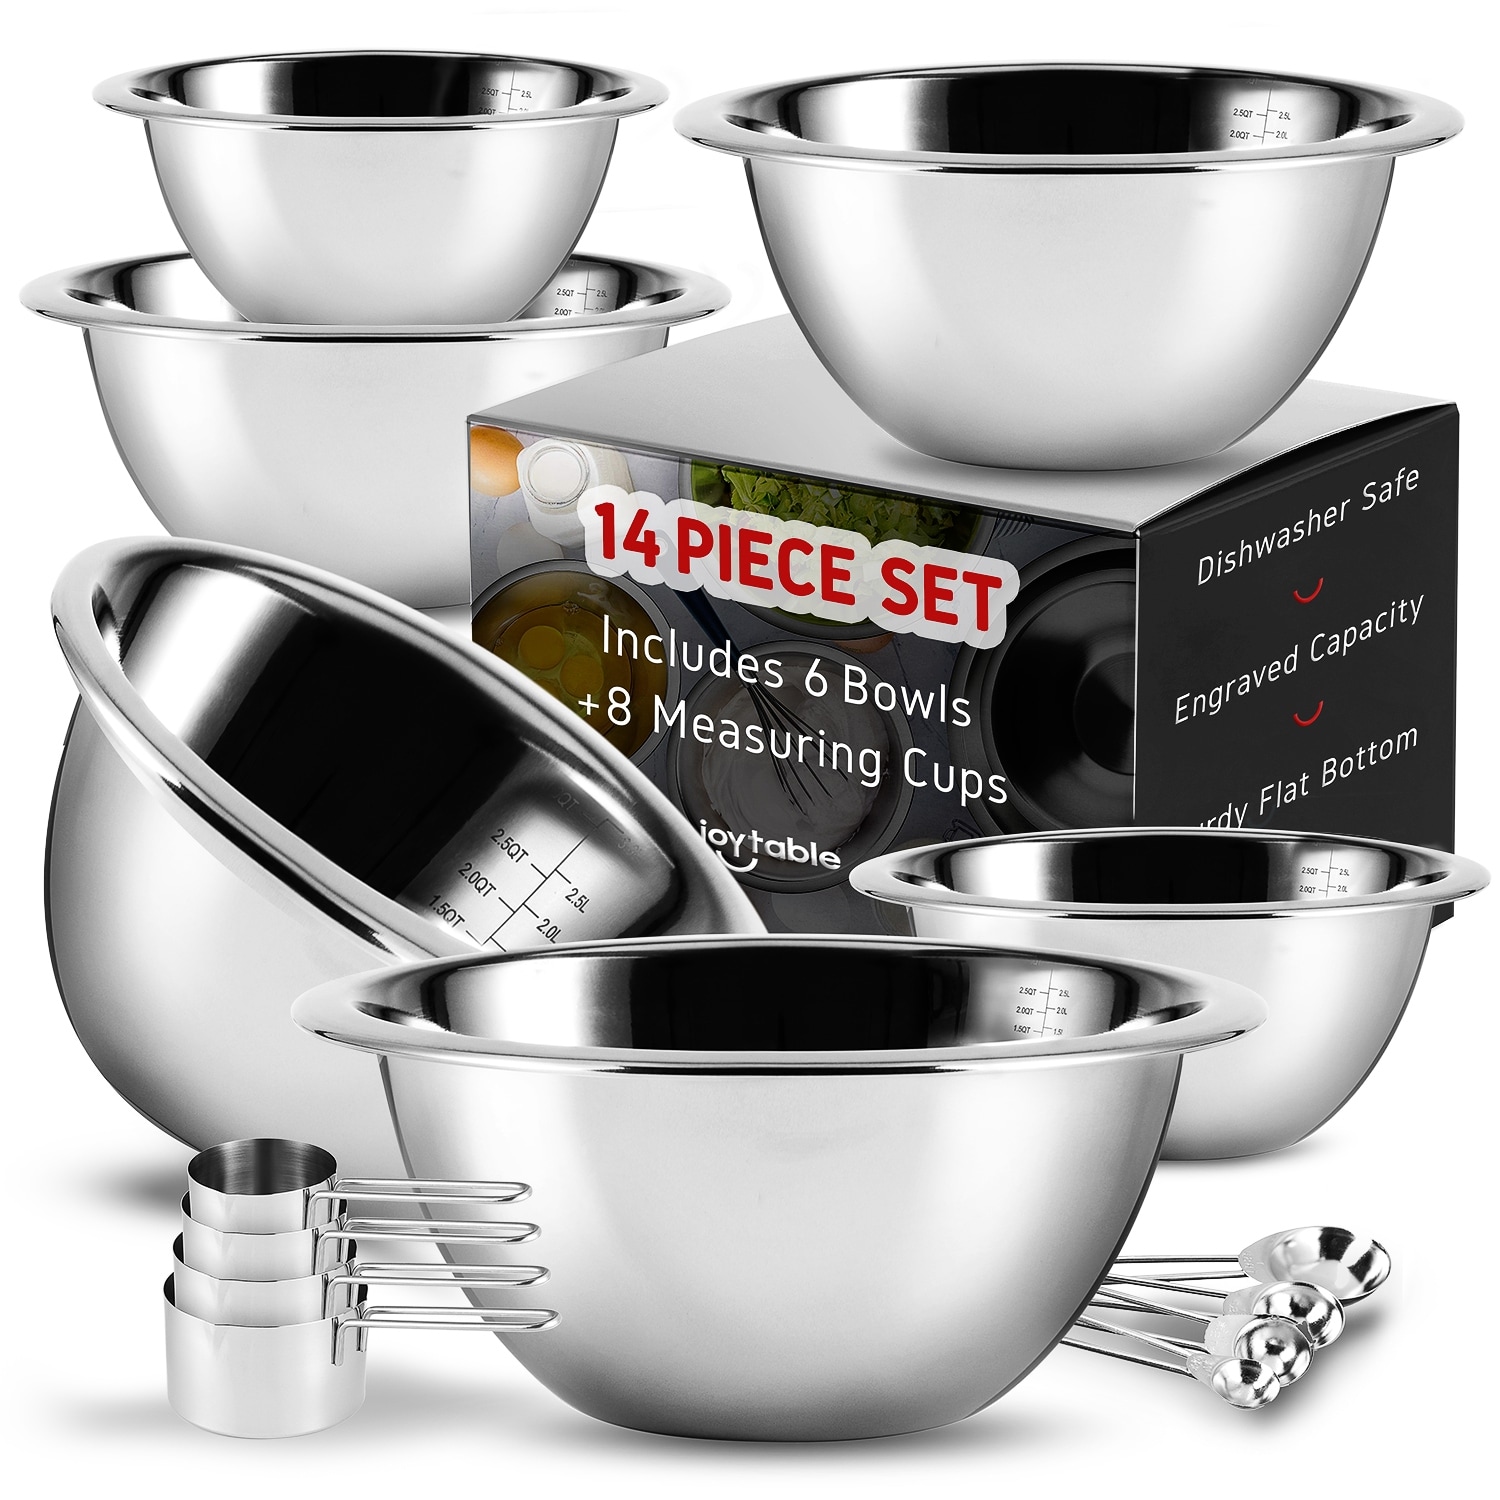 https://ak1.ostkcdn.com/images/products/is/images/direct/02a0e4dbc5fe1e485418f8df68e44891d66ffb33/Joytable-14-Piece-Premium-Nesting-Stainless-Steel-Mixing-Bowls-with-Measuring-Cups-and-Spoons-Set.jpg